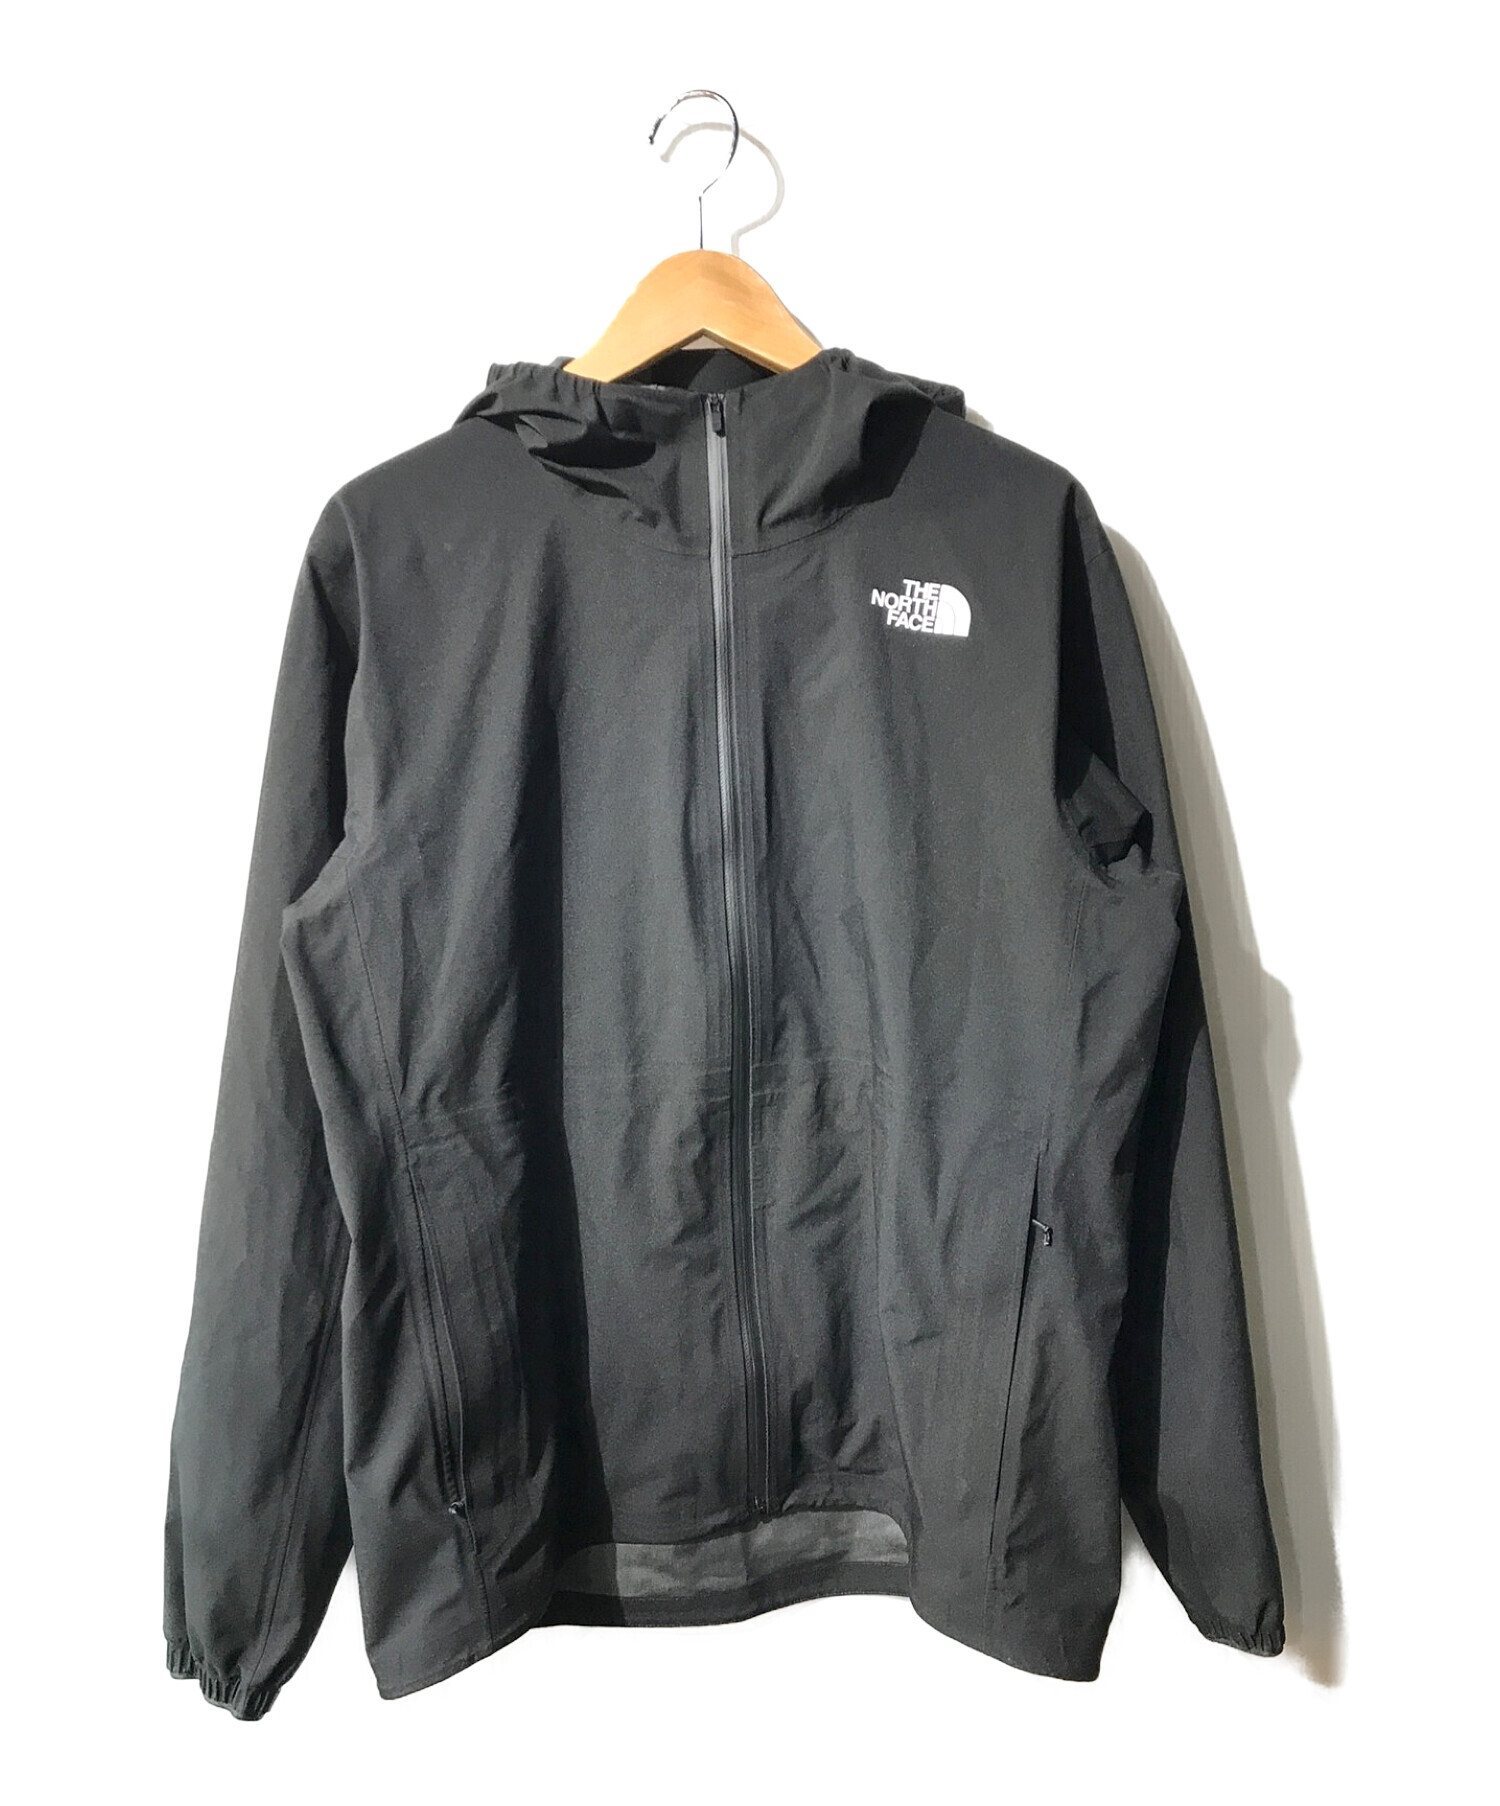 THE NORTH FACE　FL Mistway Jacketような着心地を実現